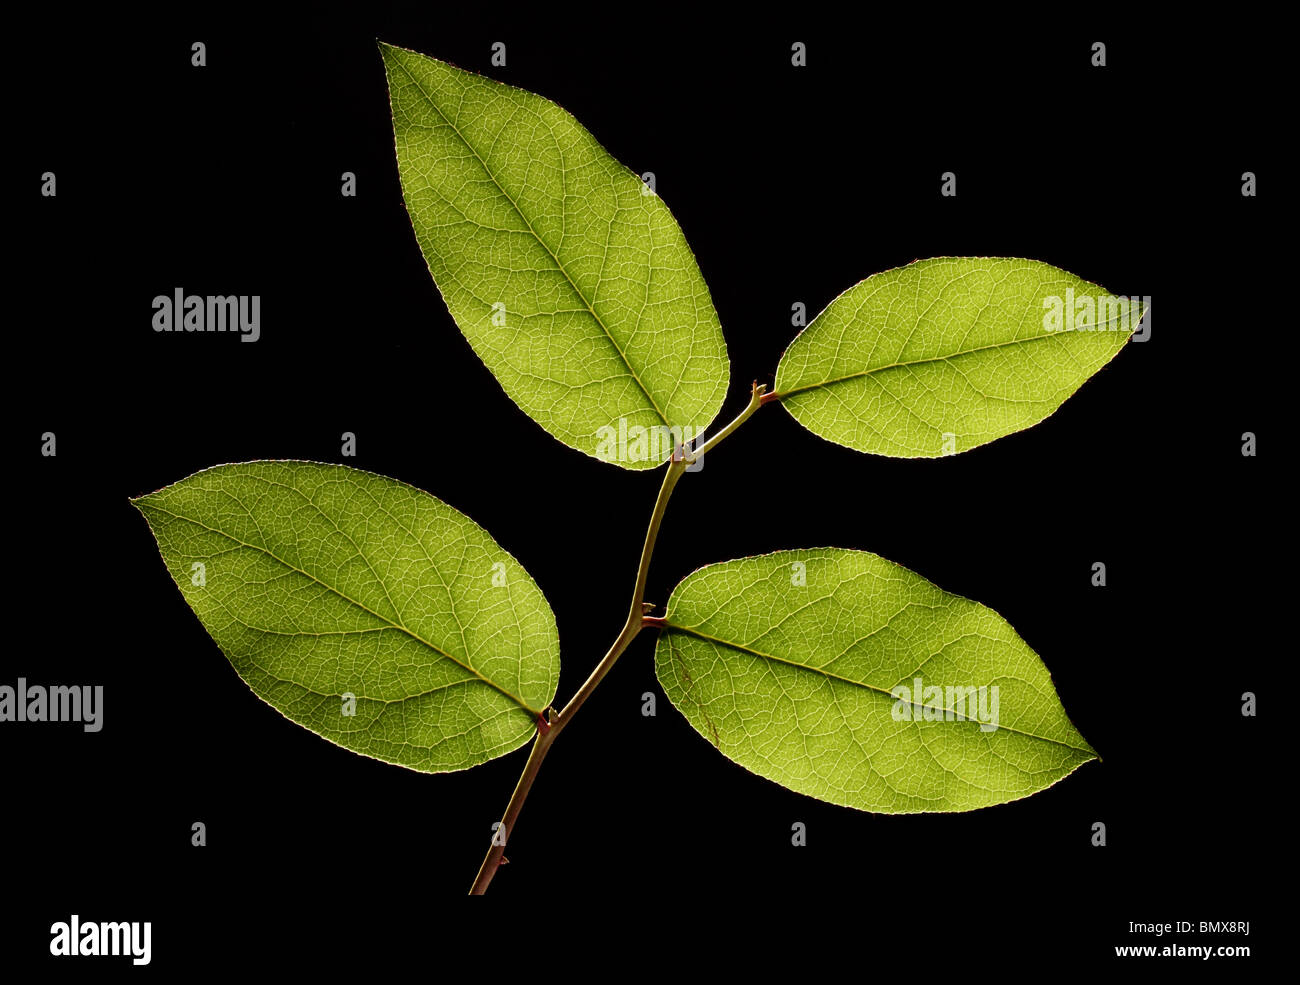 Four green plant leaves on a branch, black background Stock Photo